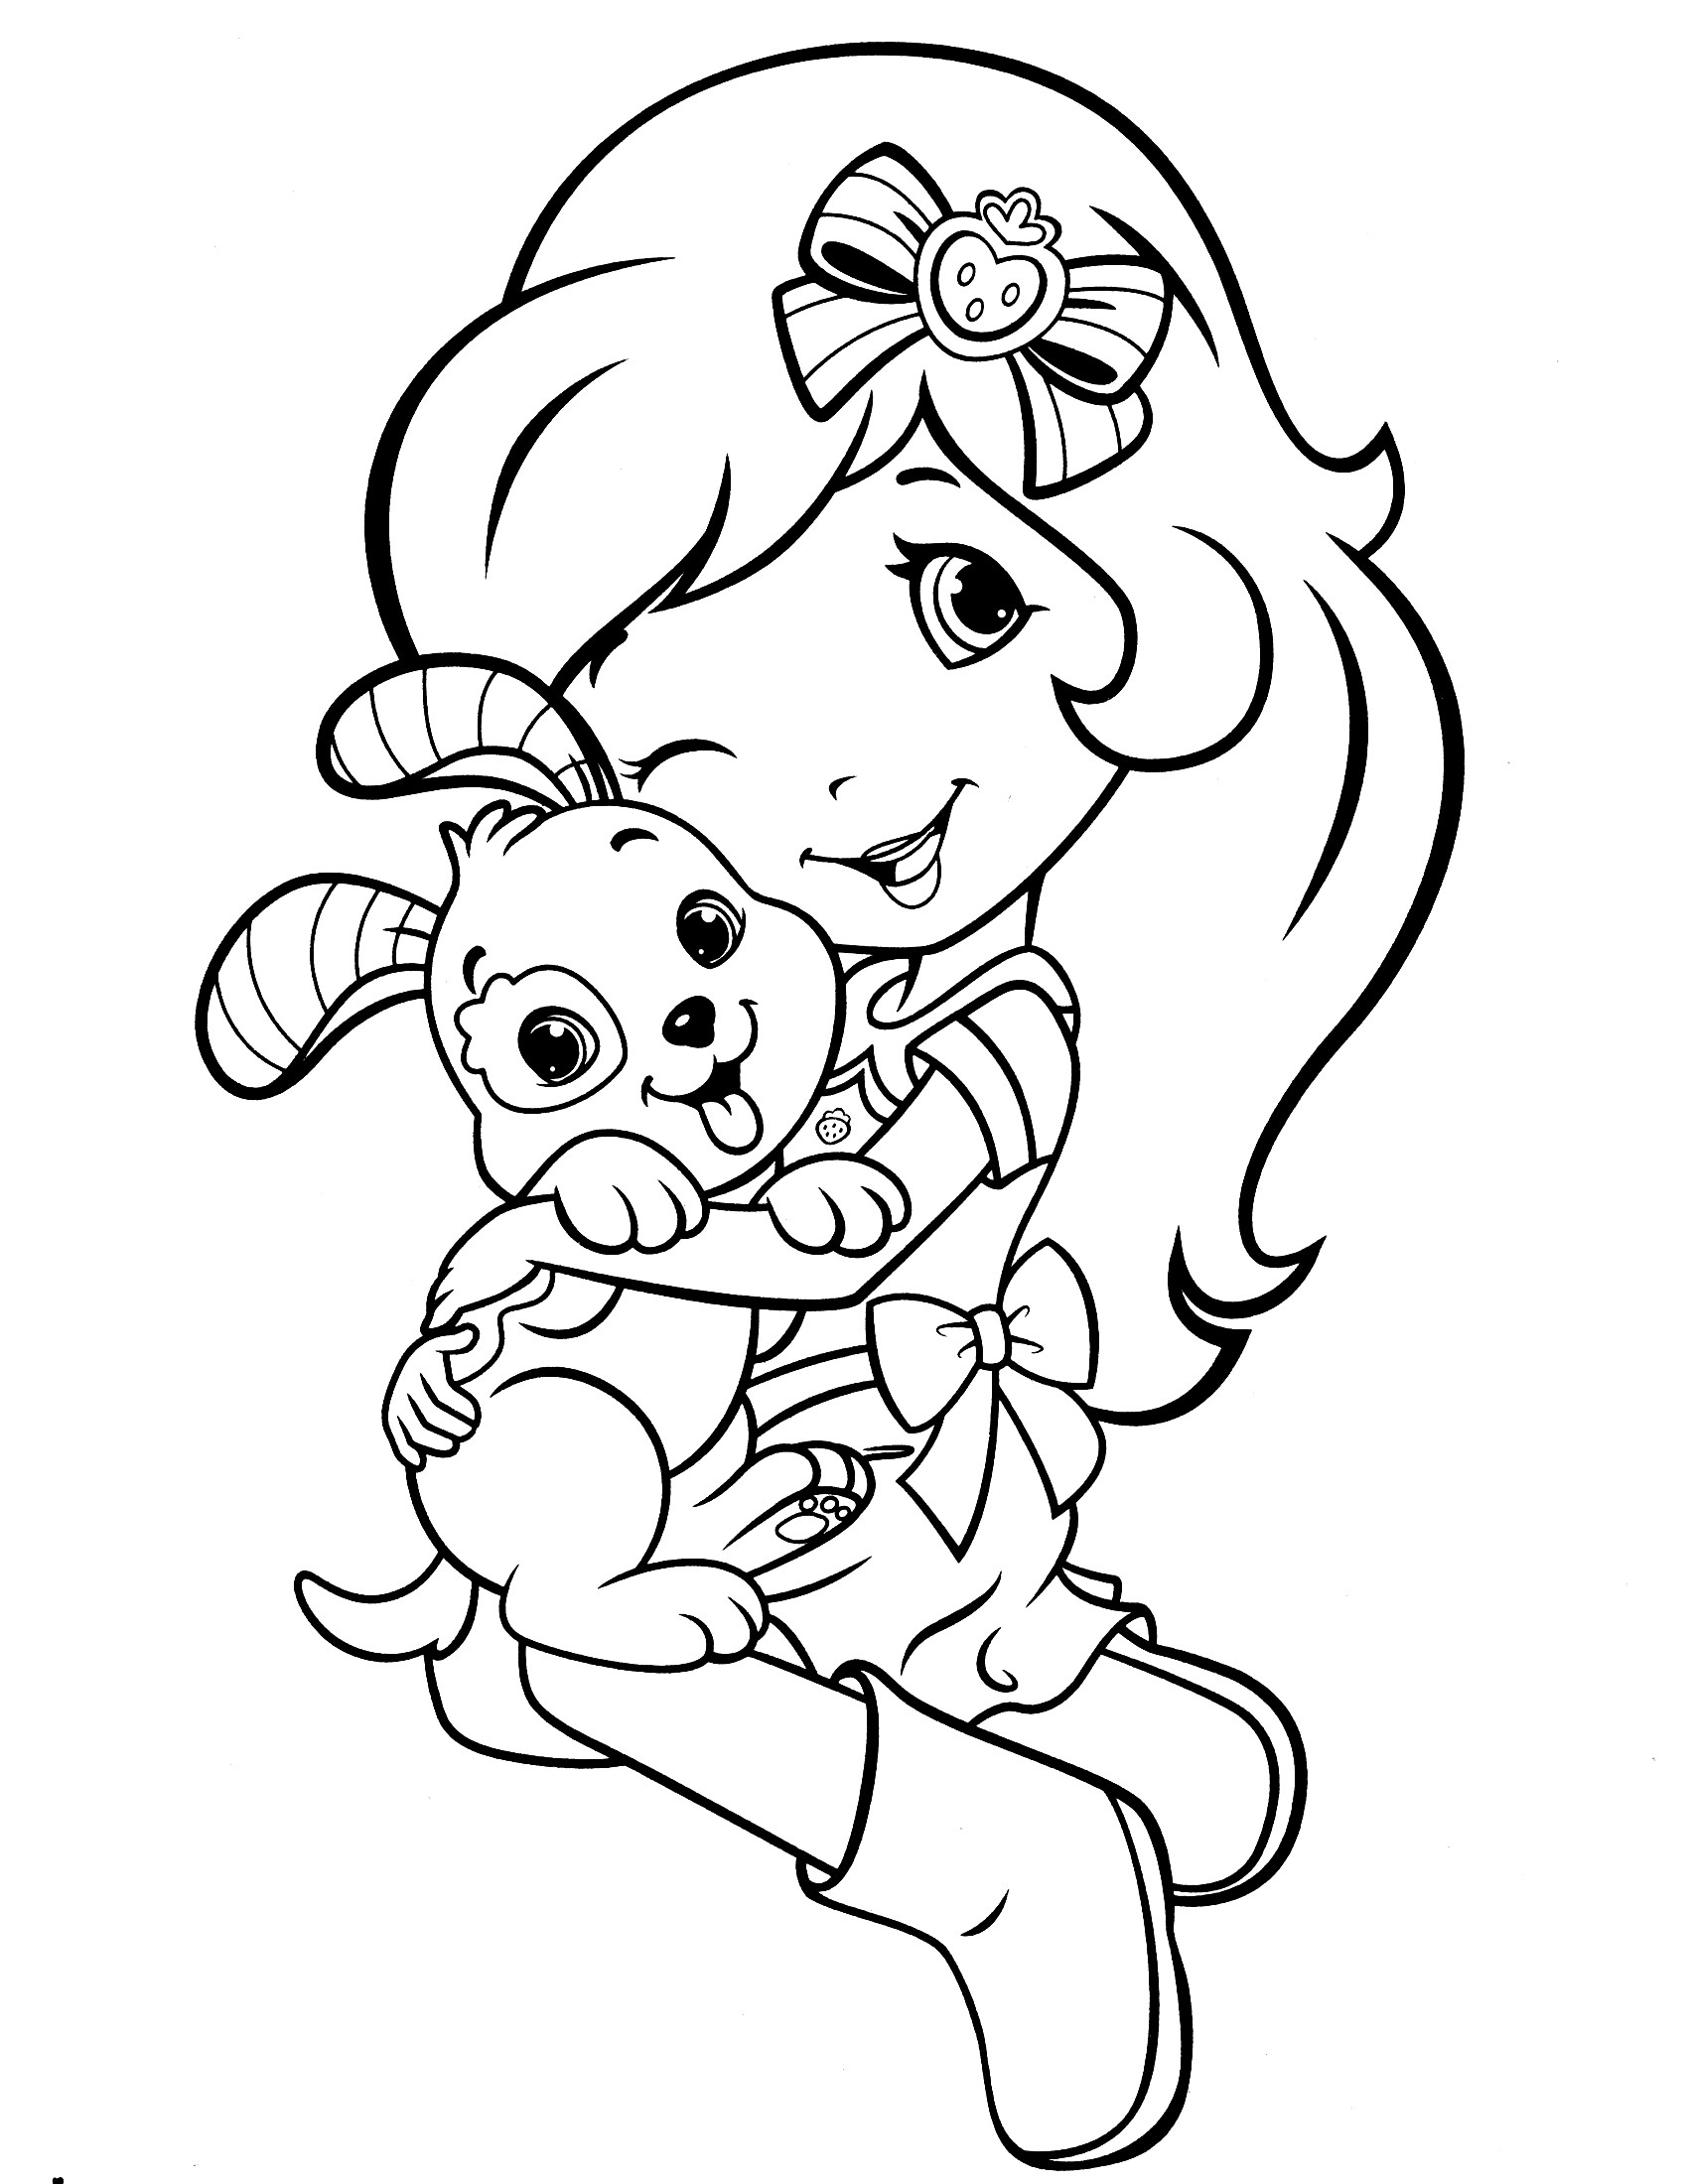 Cool Coloring Pages For Girls
 Strawberry Shortcake Coloring Pages Cool coloring pages